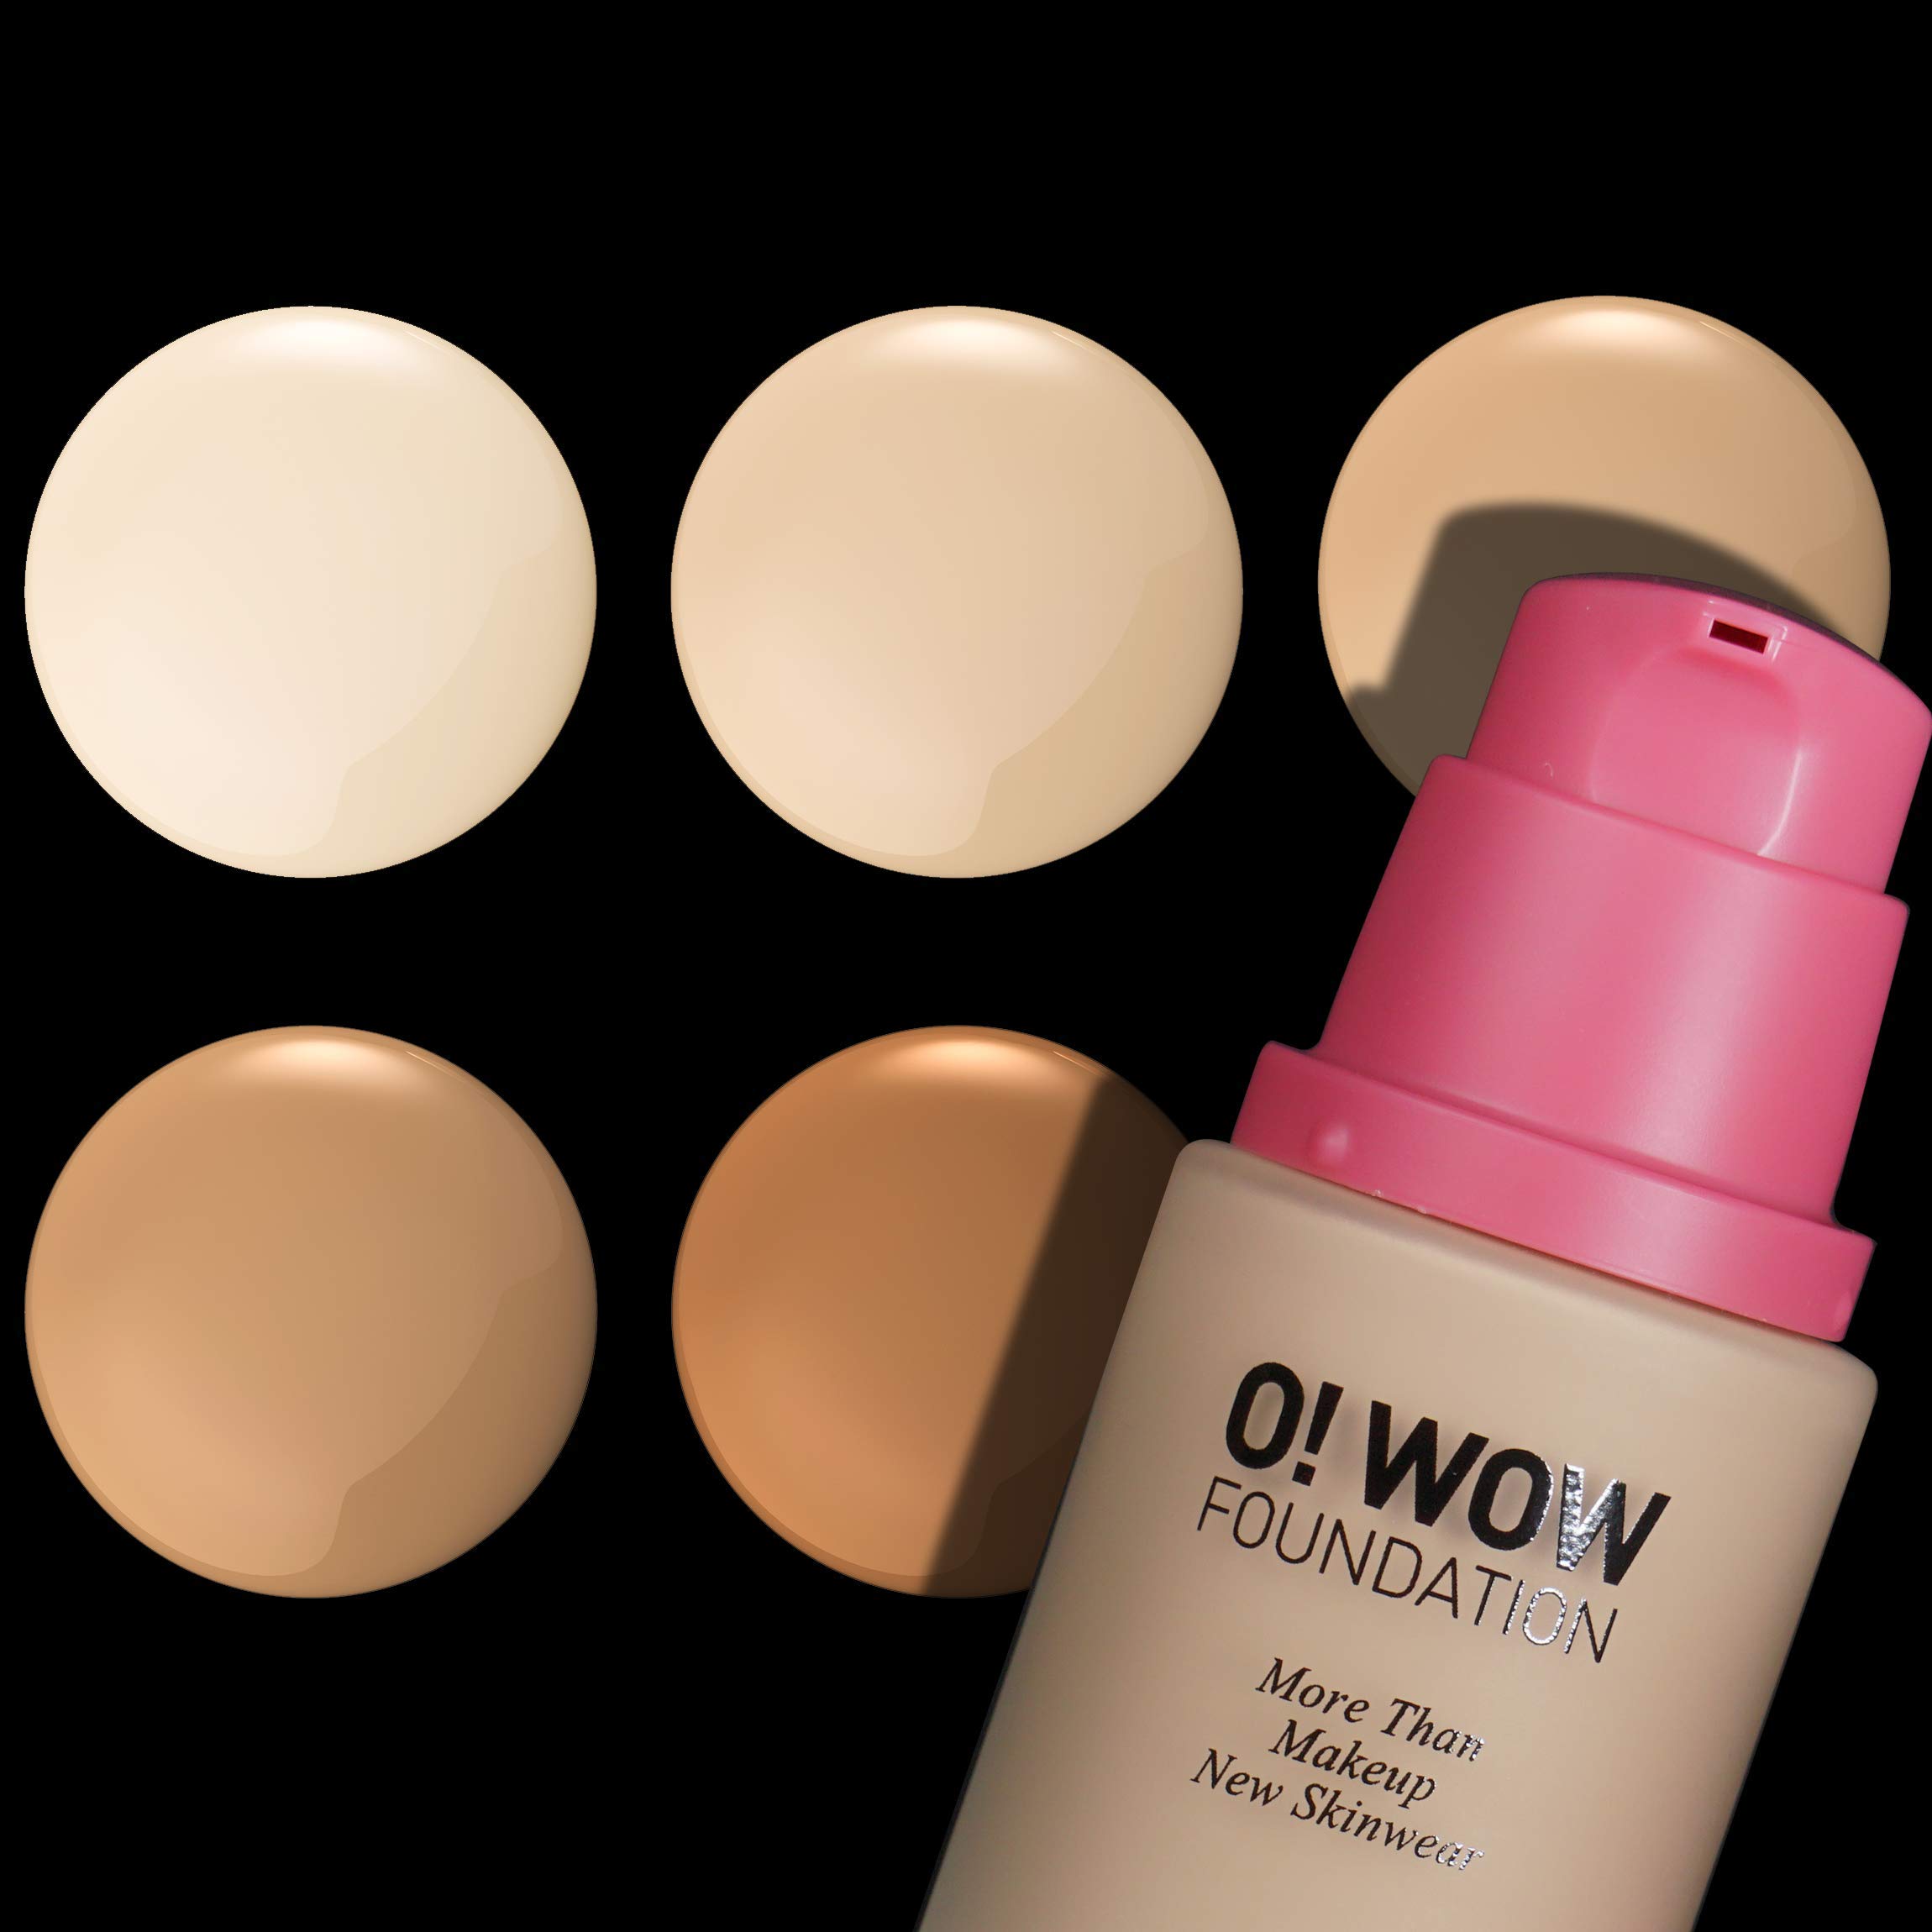 CAILYN O! Wow Foundation & Deluxe Mineral Blush Powder (Mb1) Set, WOW-1 BIRCH